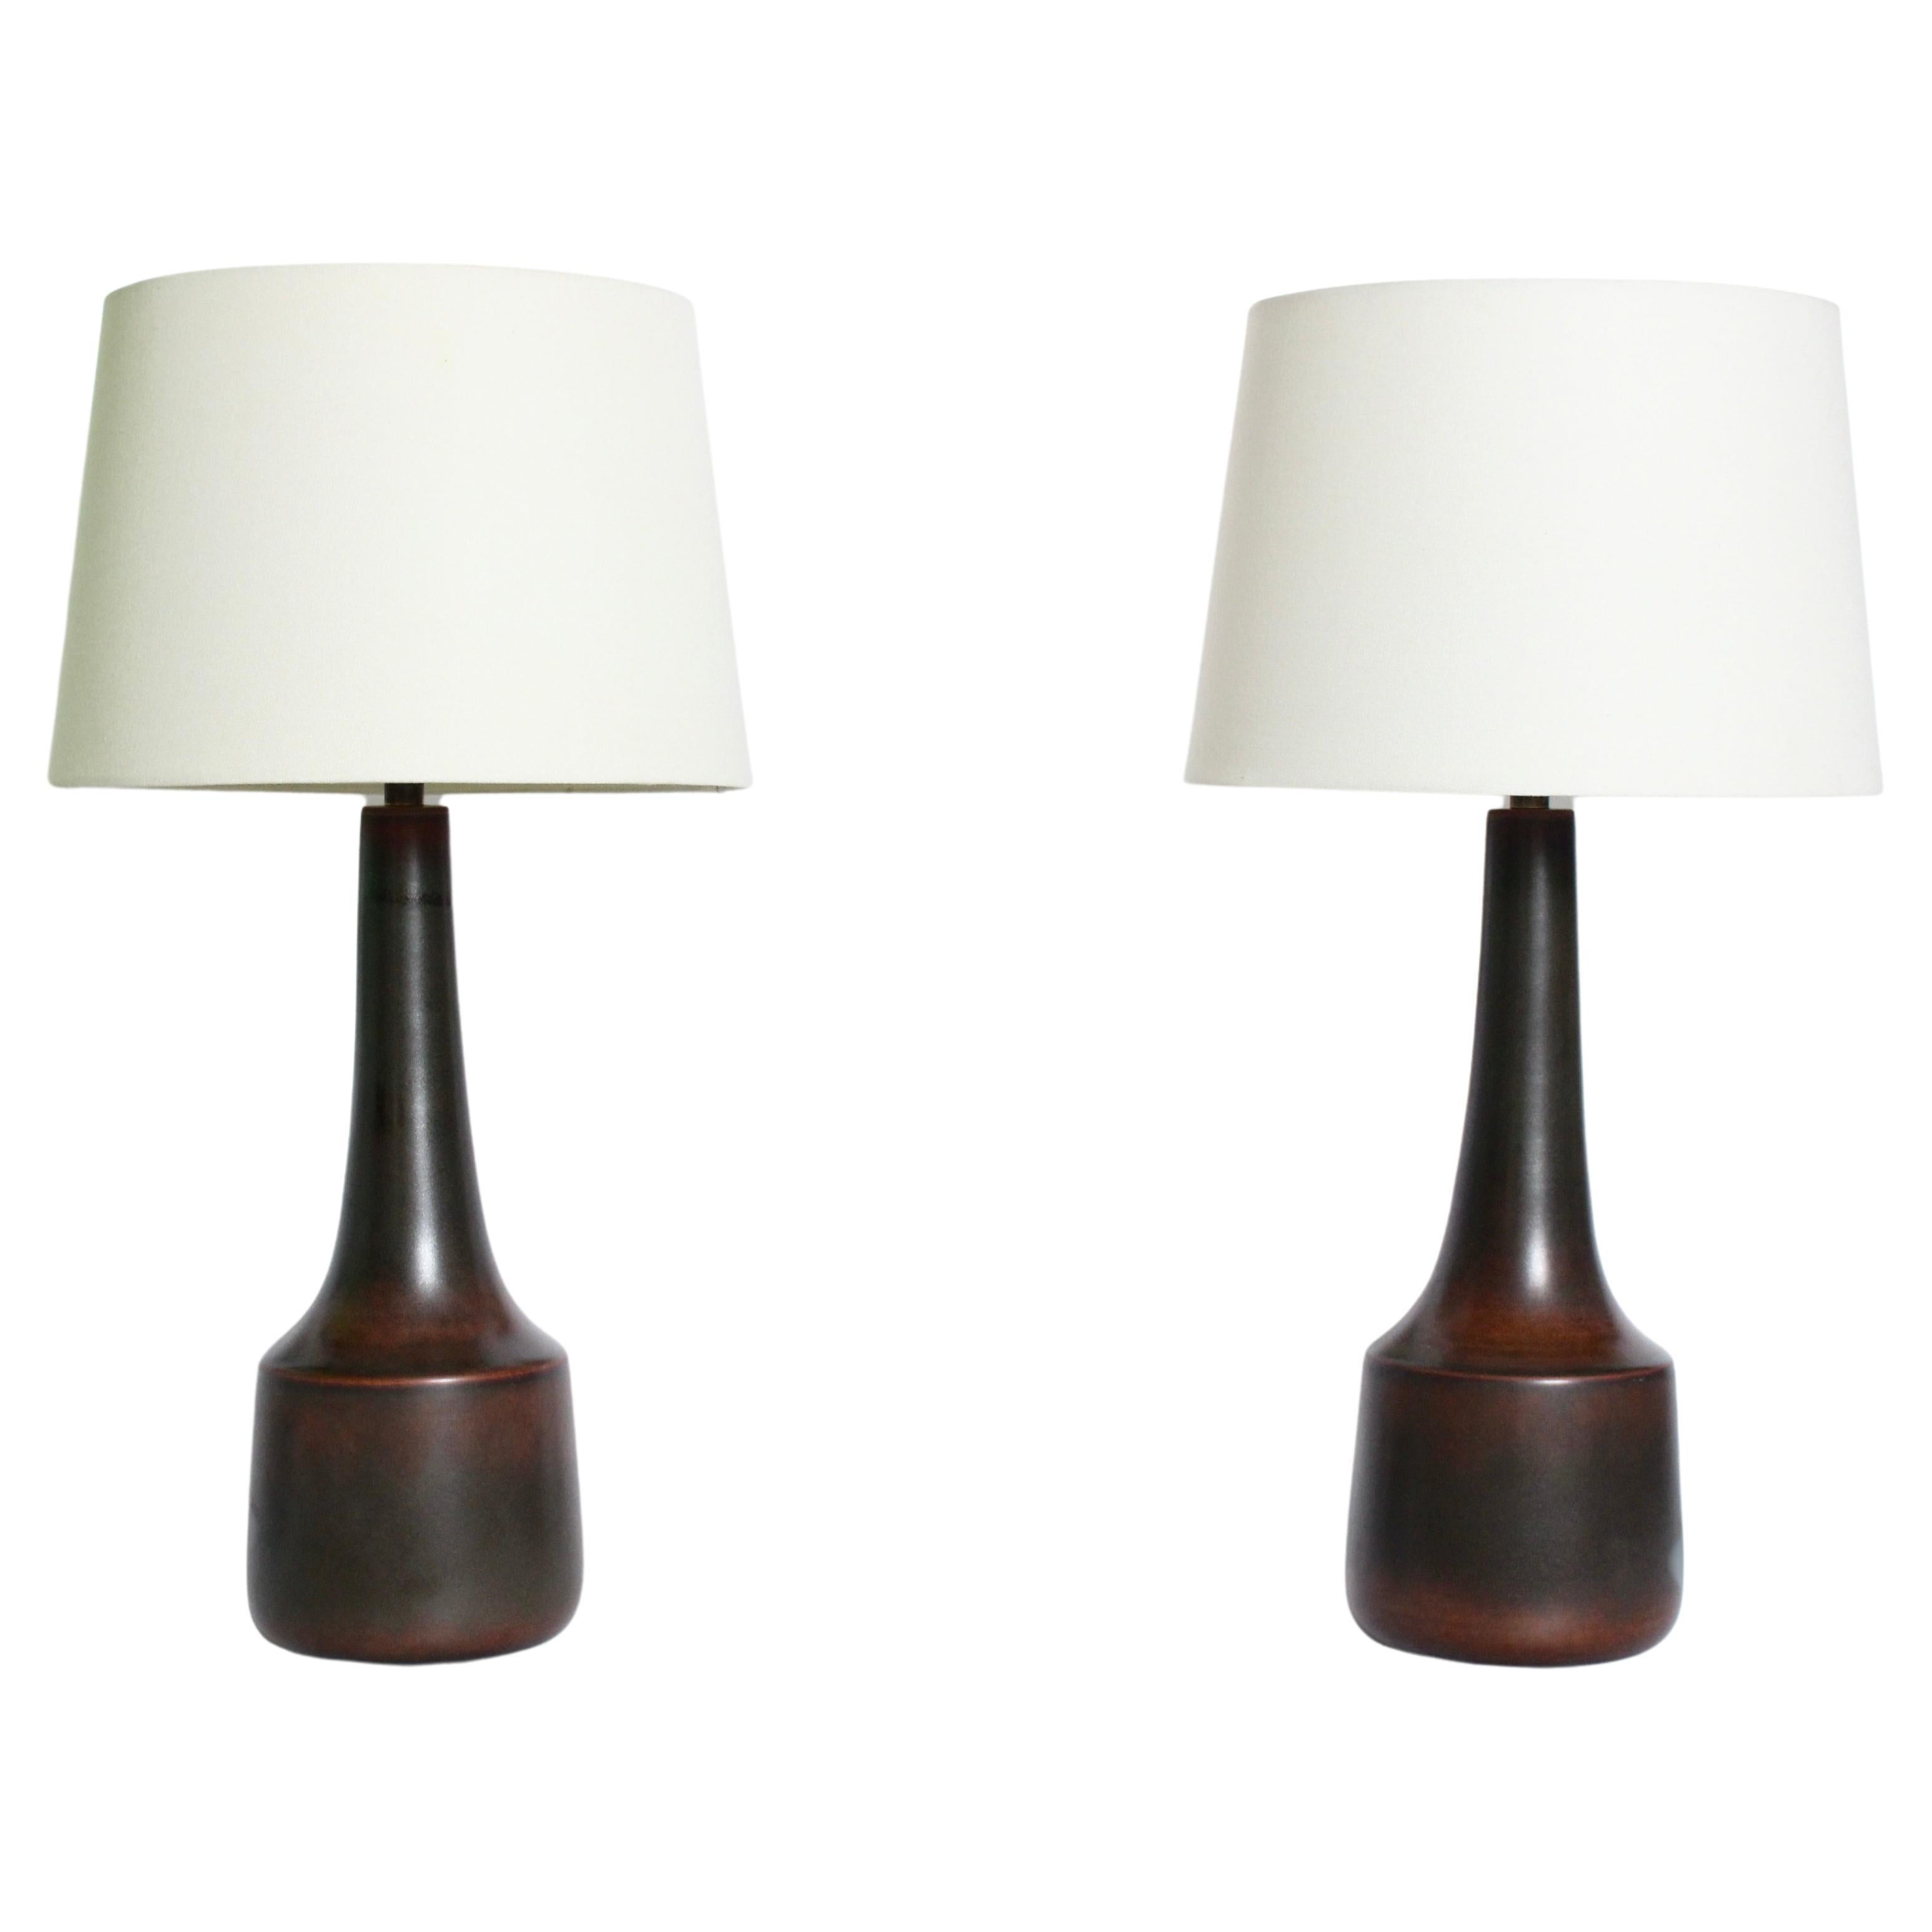 Taller pair of Lotte and Gunnar Bostlund glazed stoneware Table Lamps, C. 1970.  Featuring the classic Bostlund long neck bottle forms with color gradation from Chestnut (Pantone 160) at top and bottom to Dark Gray Green (Pantone 448) tones to neck